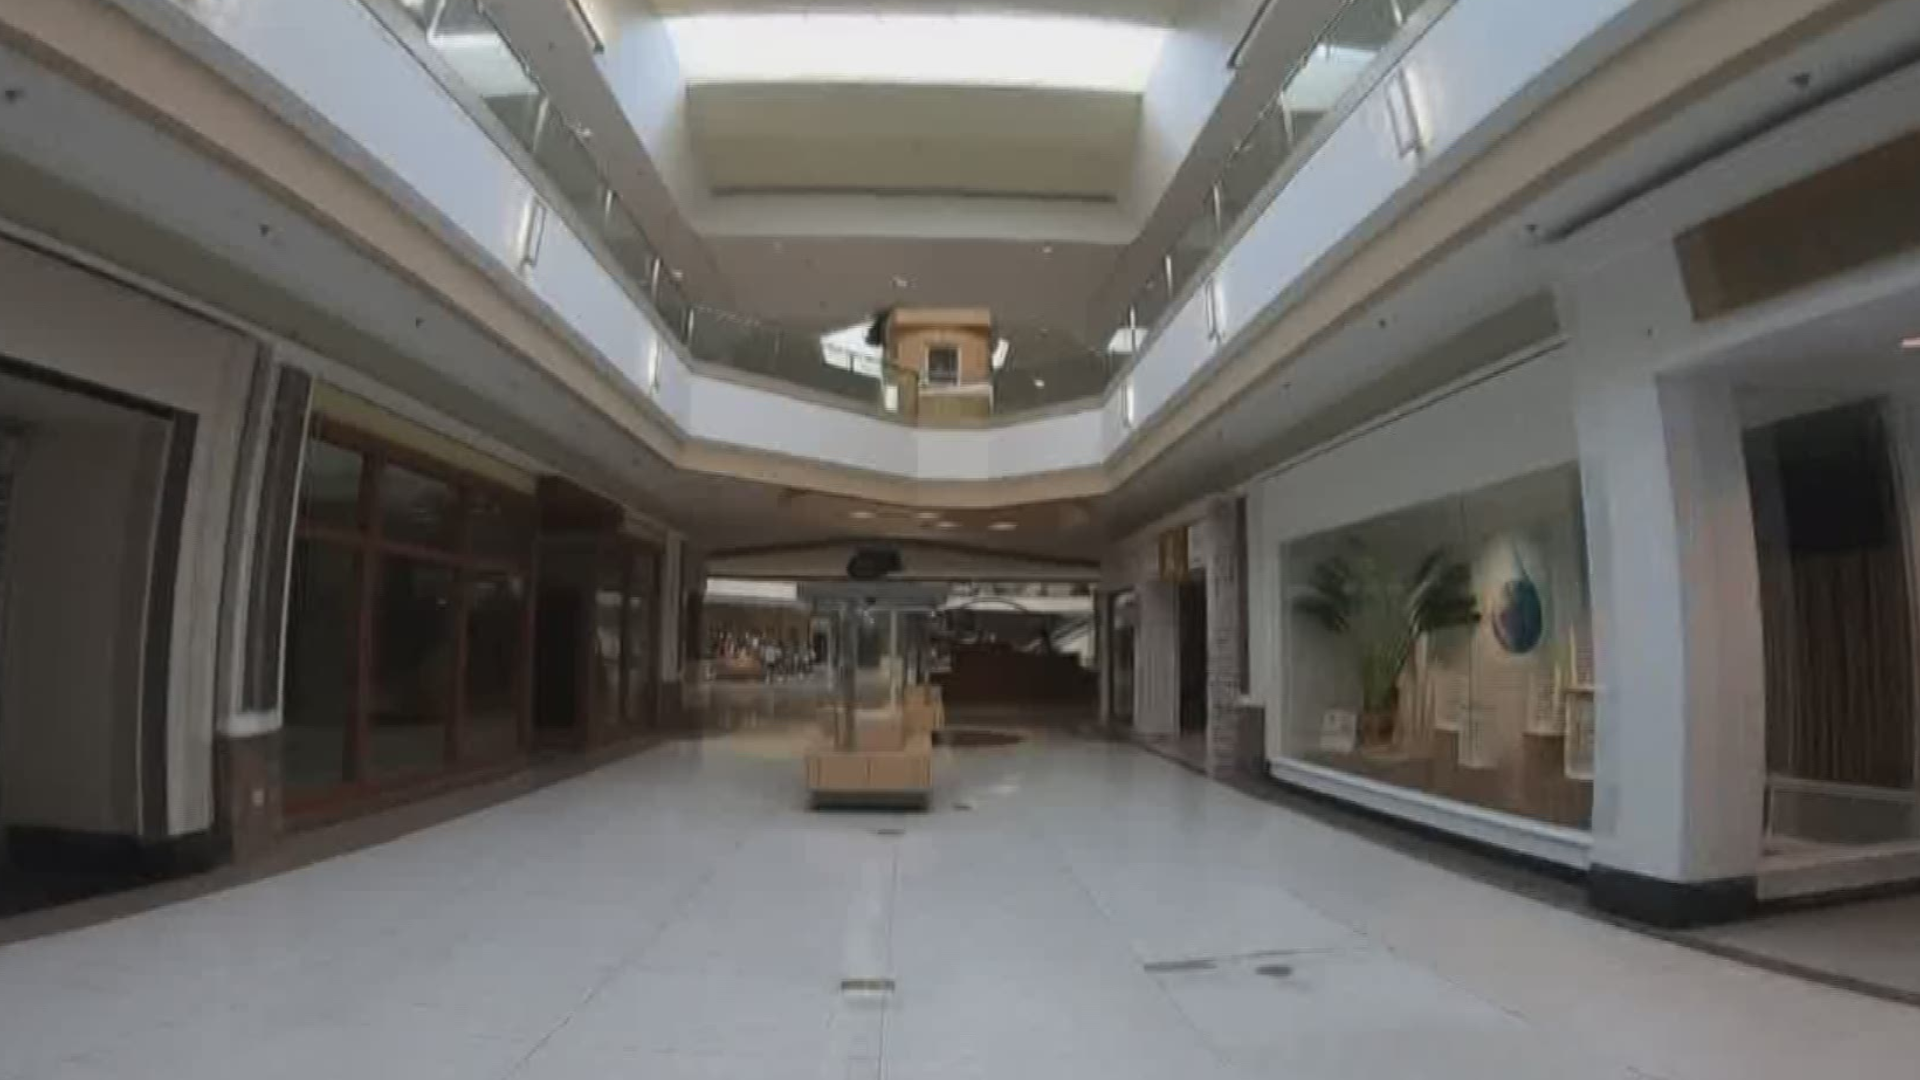 Chesterfield Mall is being redeveloped, and we're getting a good idea of what's heading in there.